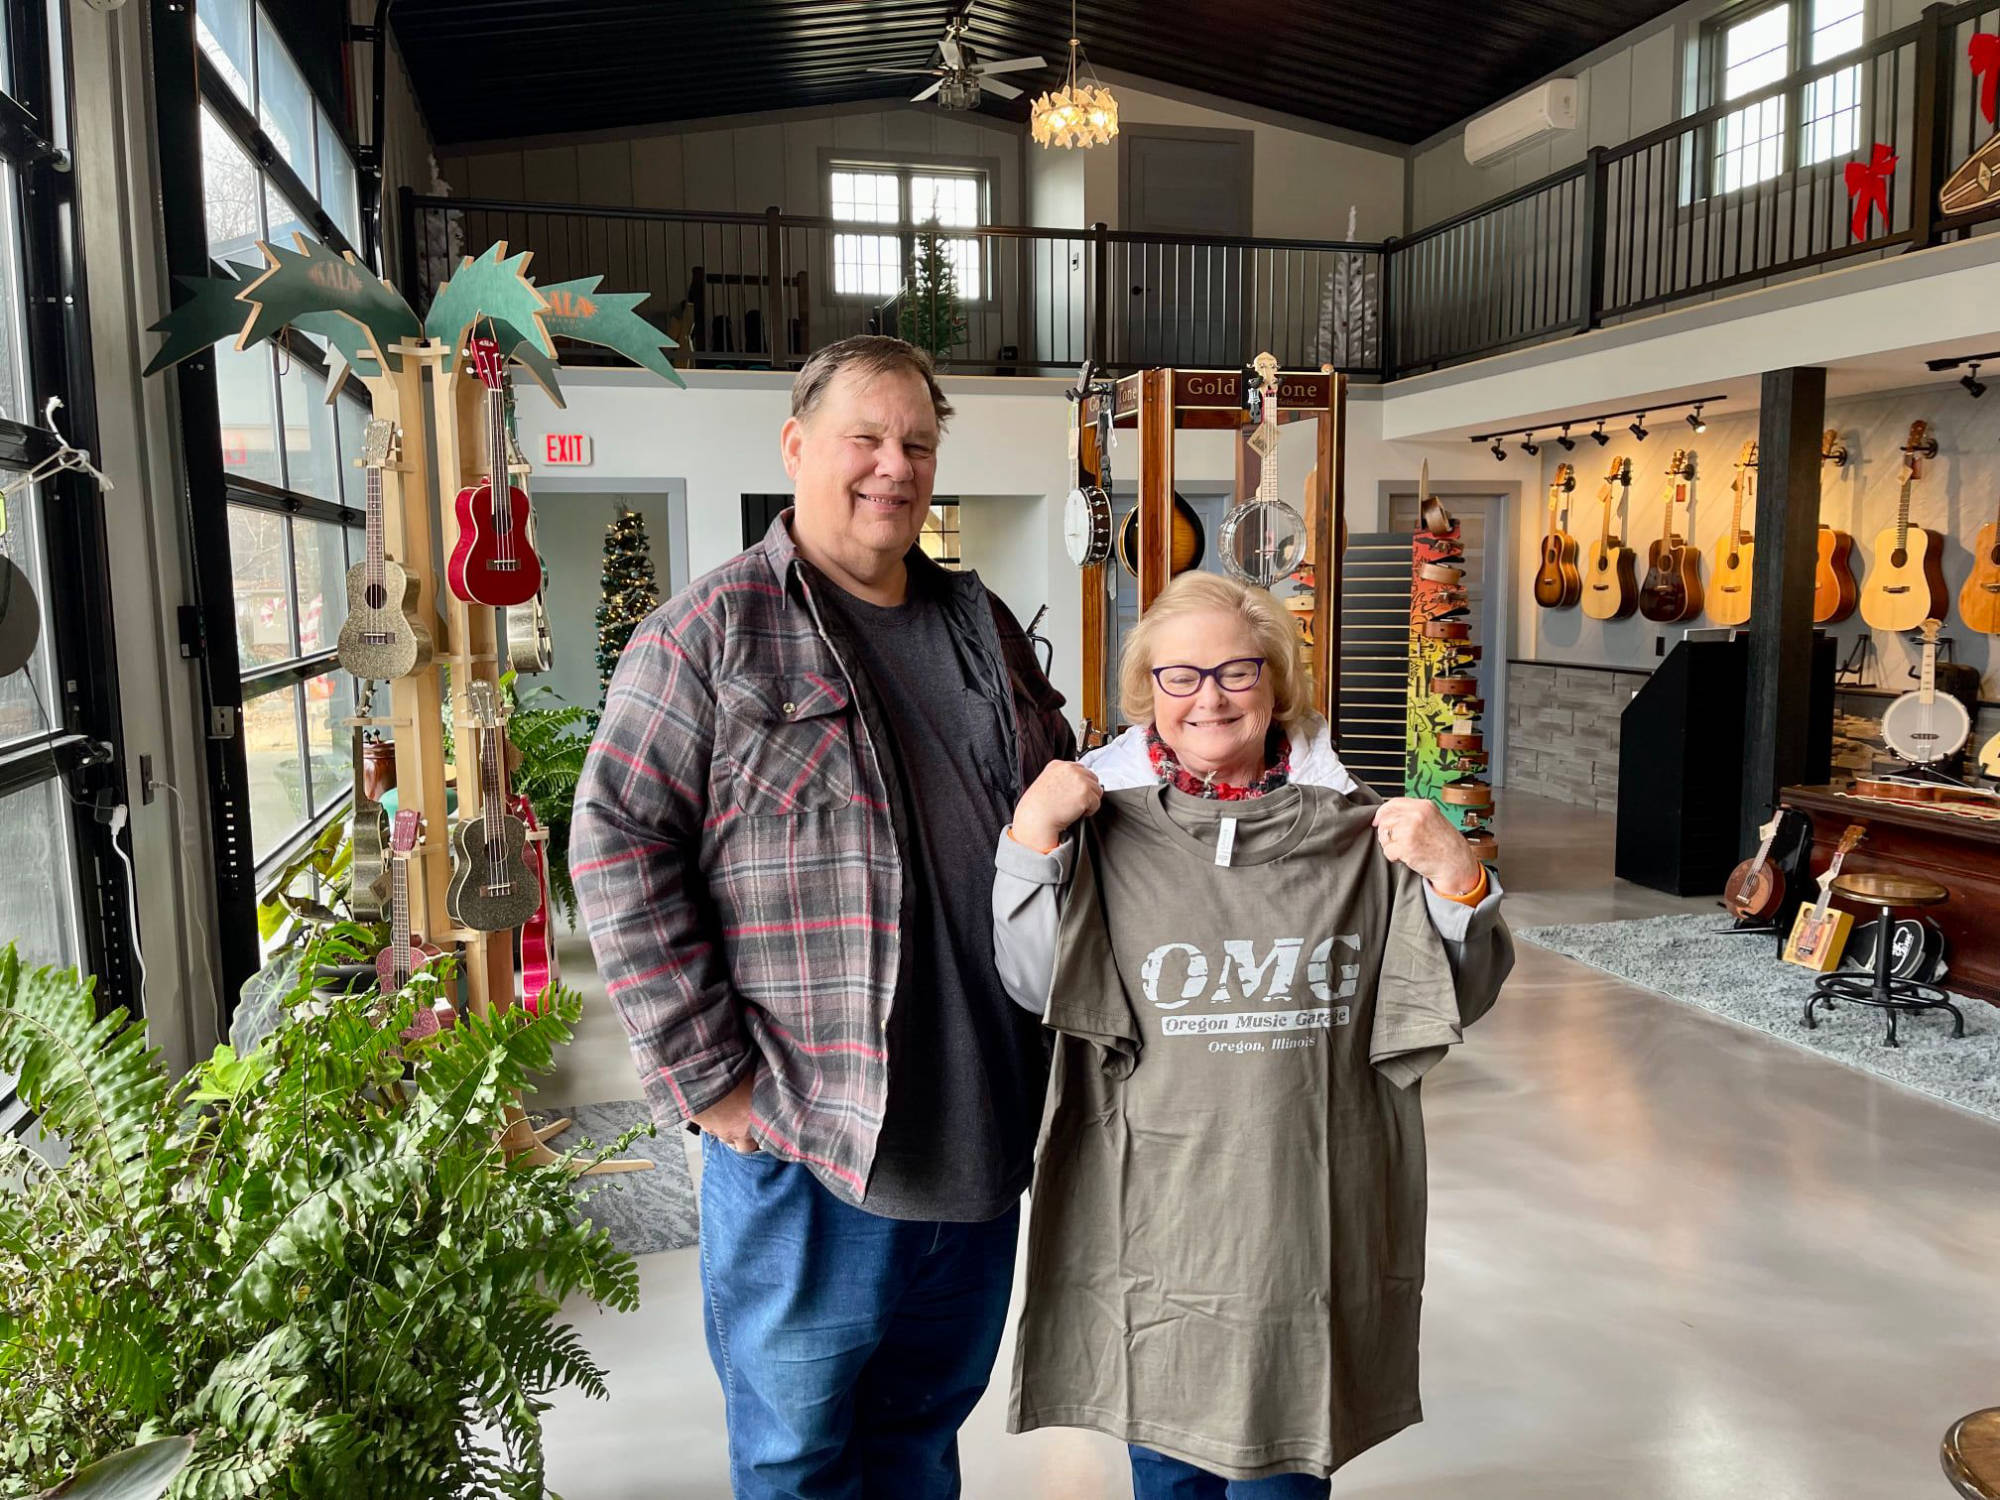 Jeff and Debbie with OMG t-shirt